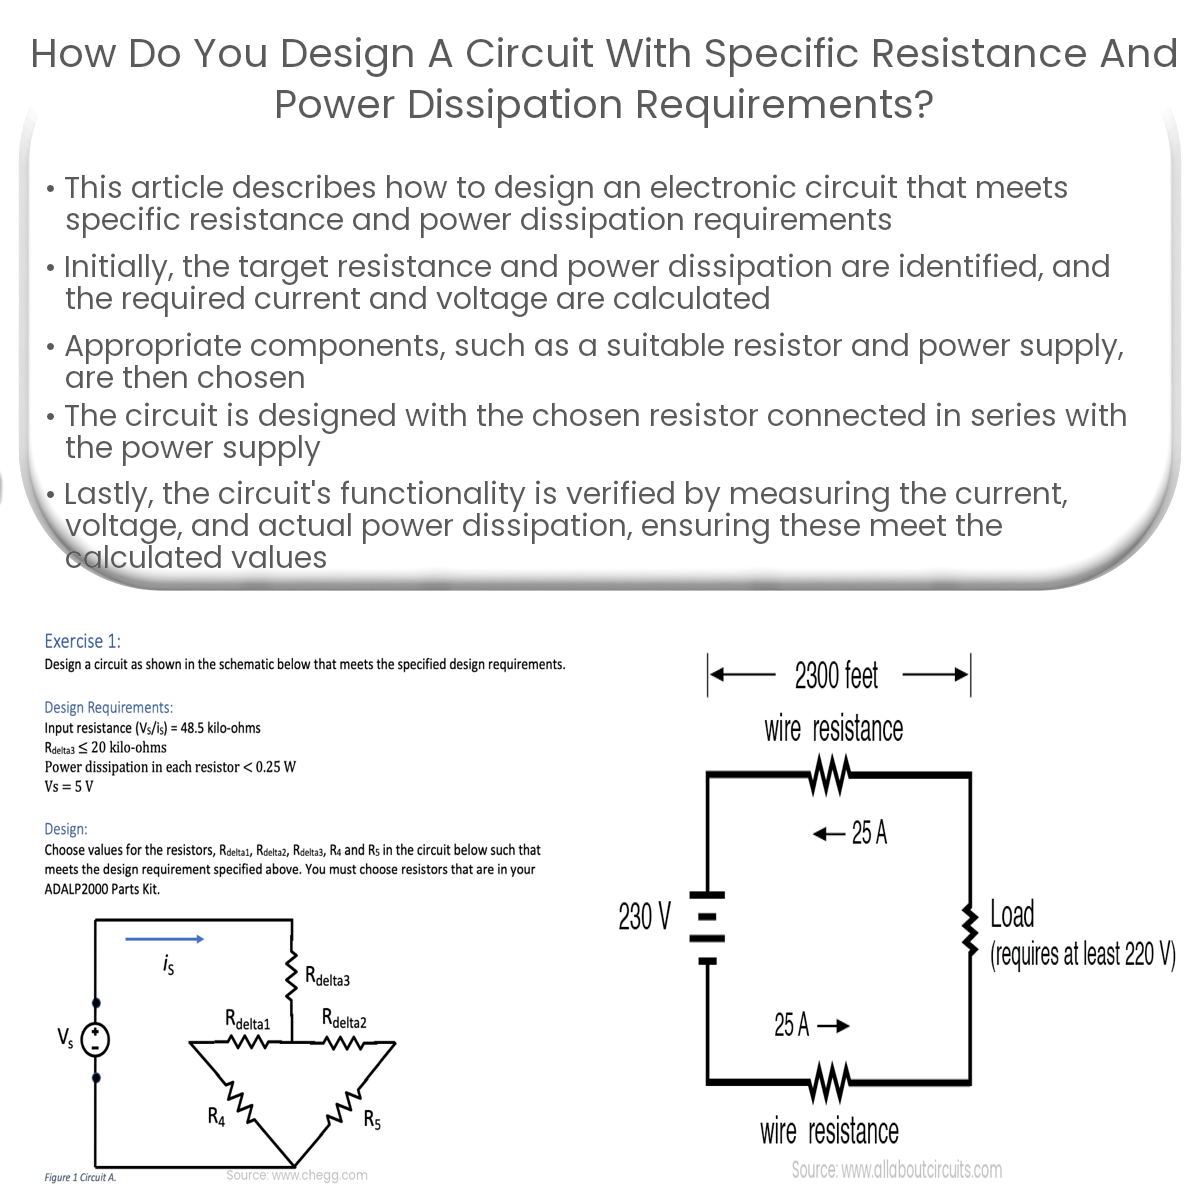 How do you design a circuit with specific resistance and power dissipation requirements?